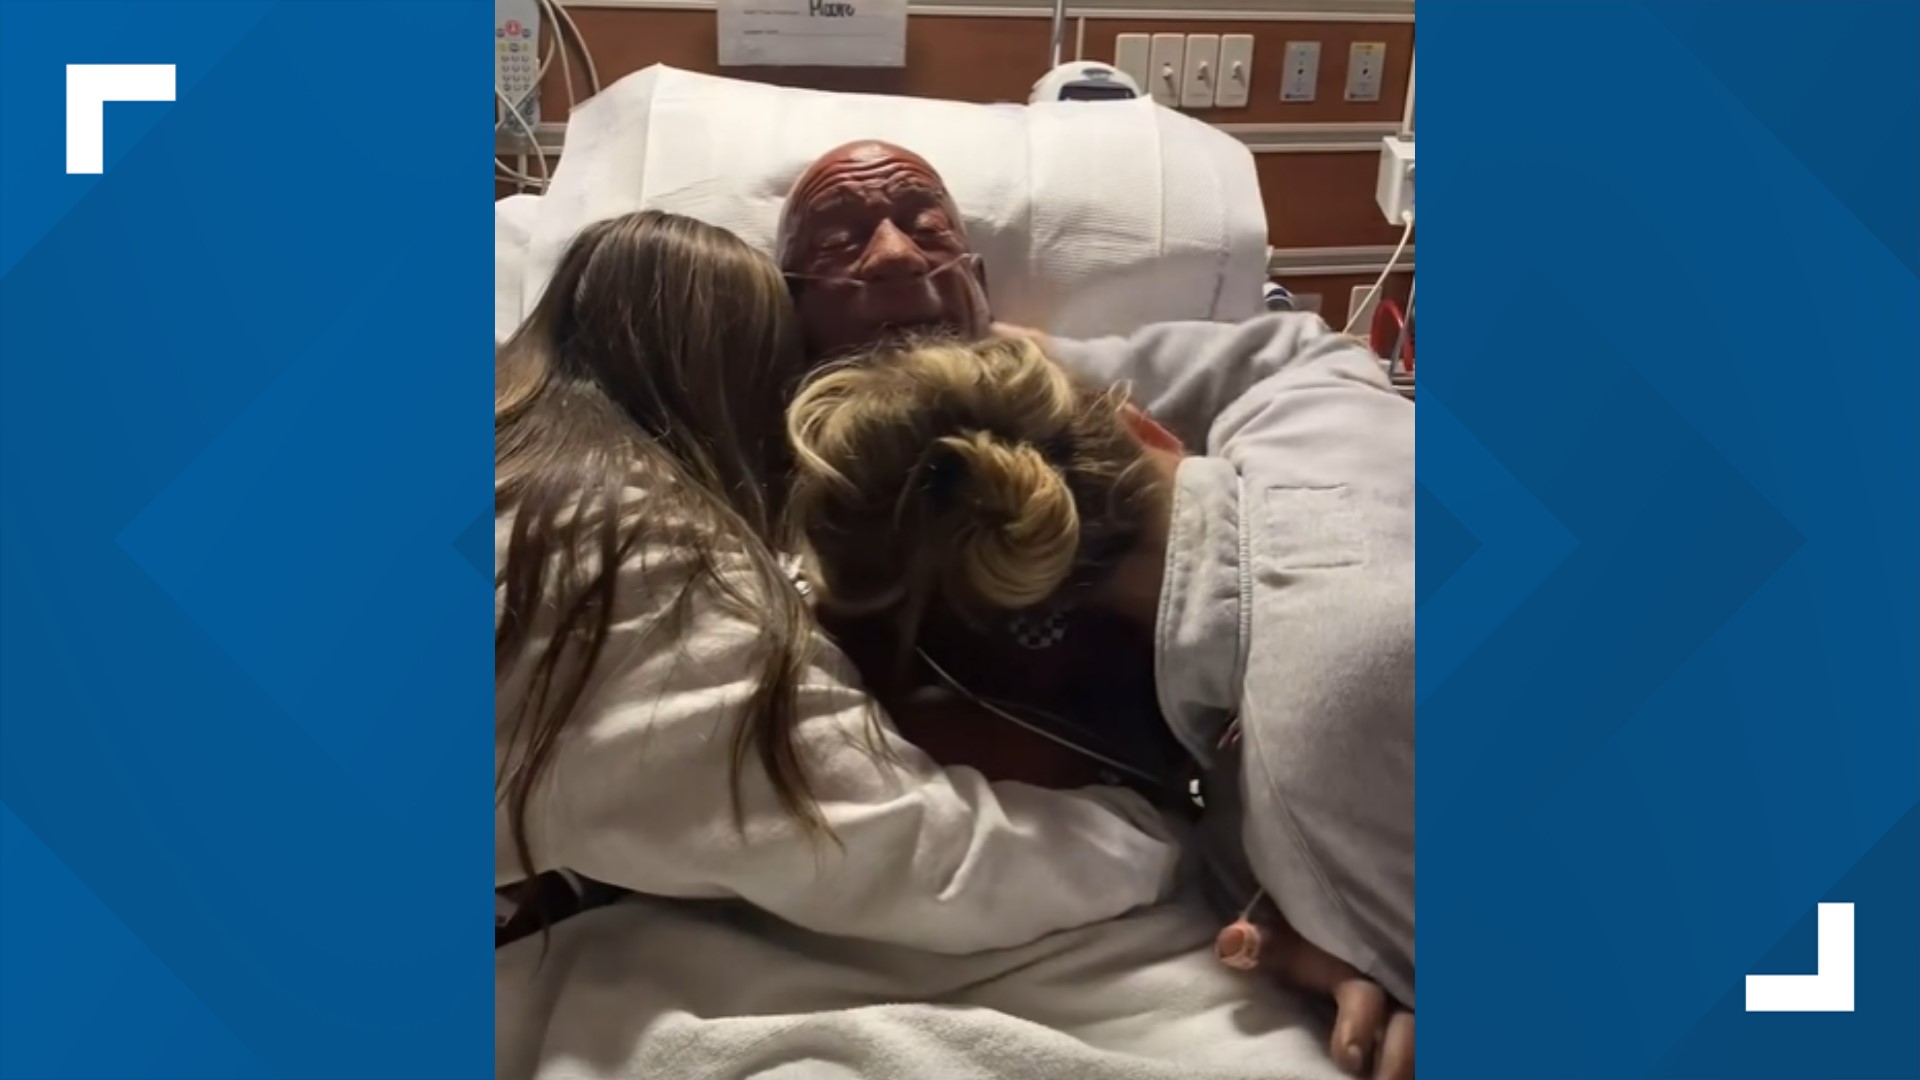 A video posted to Mark Coleman's Instagram account shows him embracing members of his family from a hospital bed in an emotional scene.